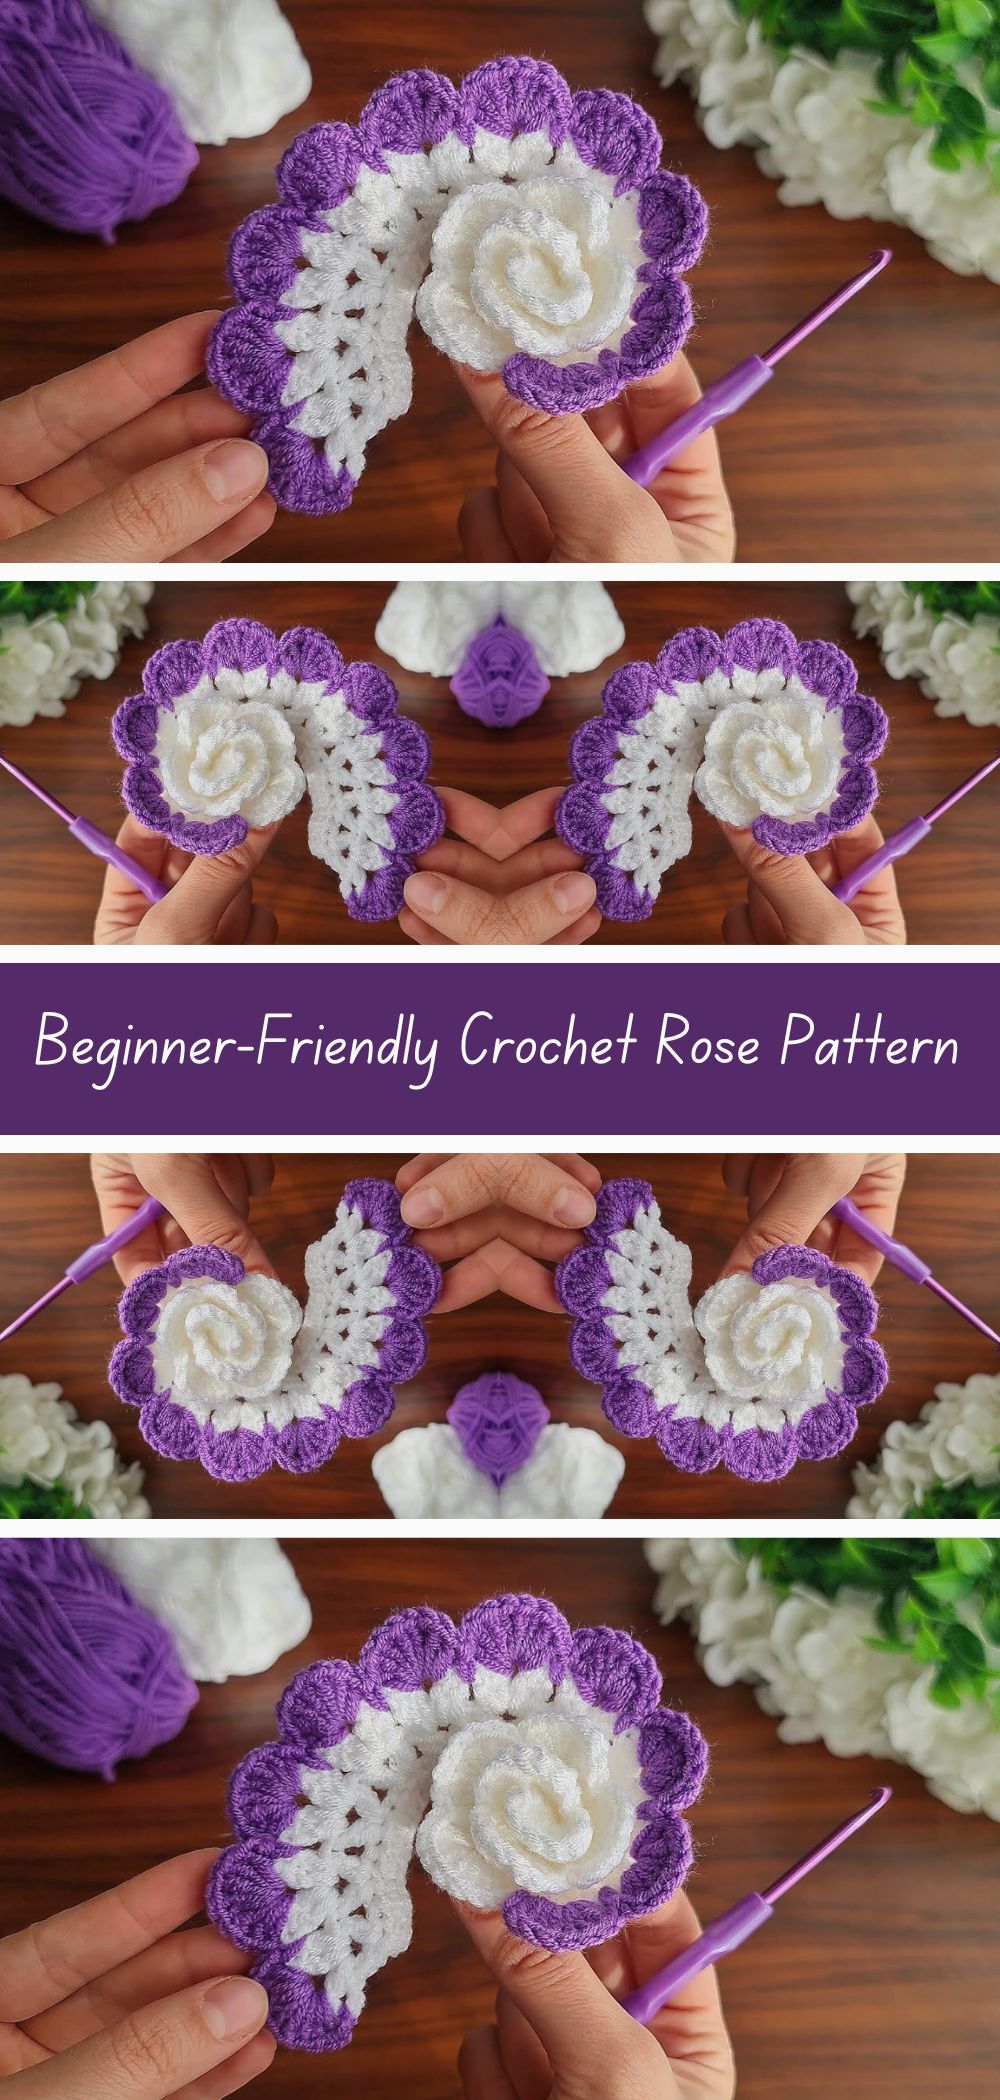 Beginner-Friendly Crochet Rose Pattern - Learn how to crochet beautiful roses with this beginner-friendly guide